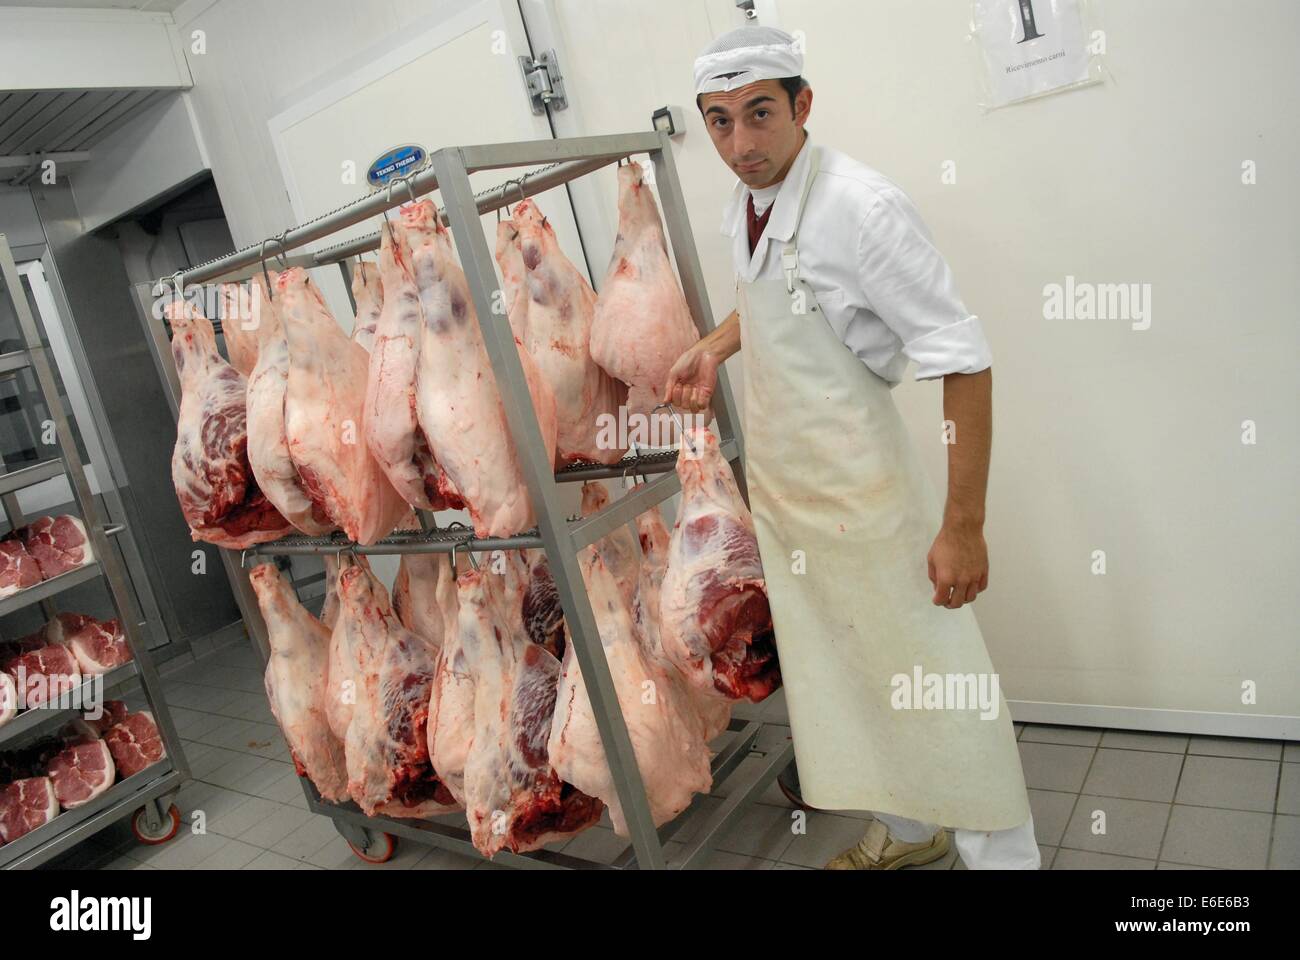 Polesine Parmense (Italy), working of the meats for the production of the 'culatello' typical ham Stock Photo